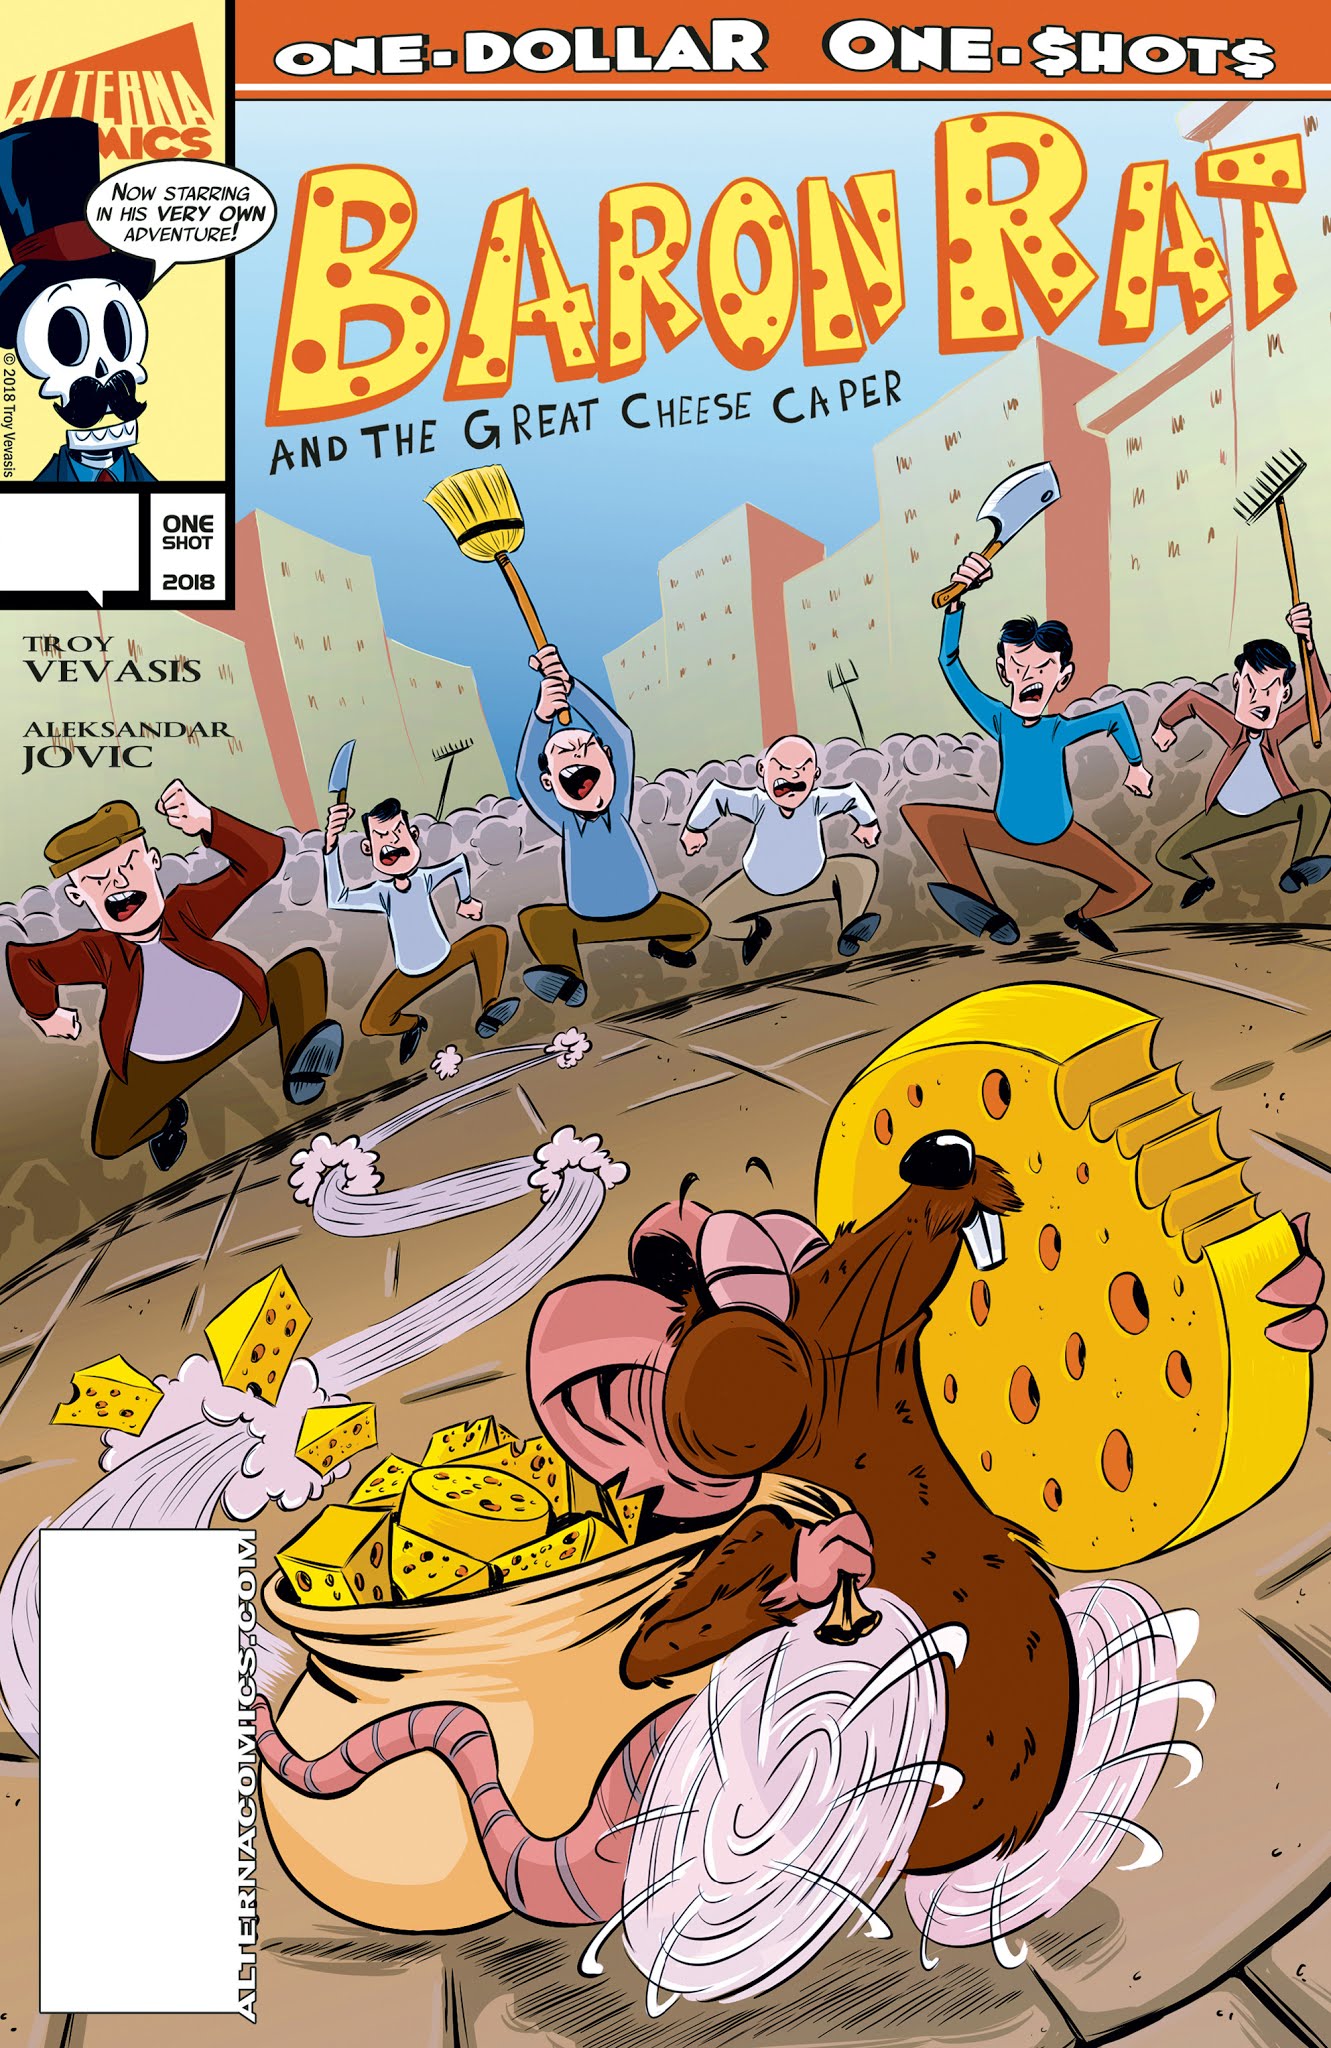 Read online One-Dollar One-Shots: Baron Rat comic -  Issue # Full - 1